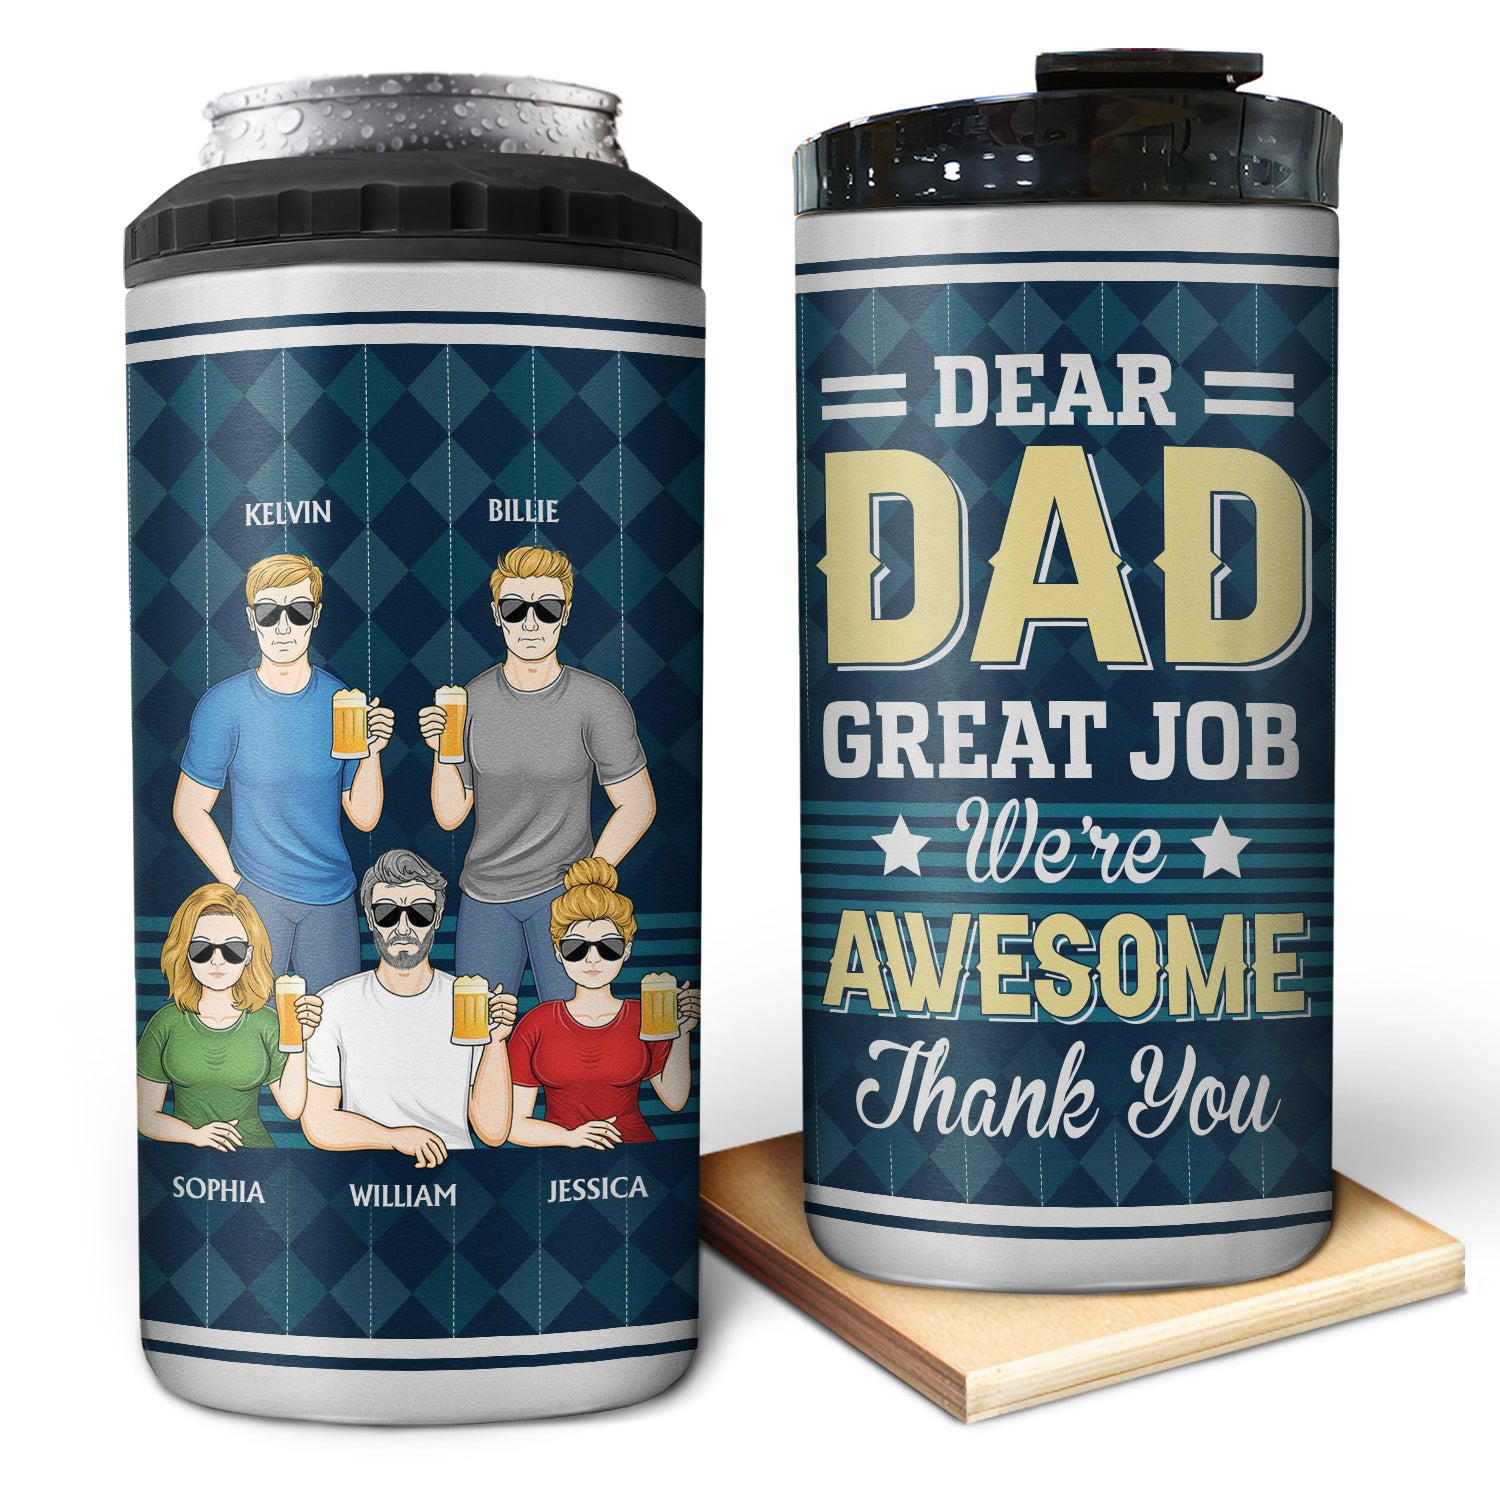 Dear Dad Great Job We're Awesome Thank You Family Vintage - Funny, Birthday Gift For Father, Papa, Husband - Personalized Custom 4 In 1 Can Cooler Tumbler